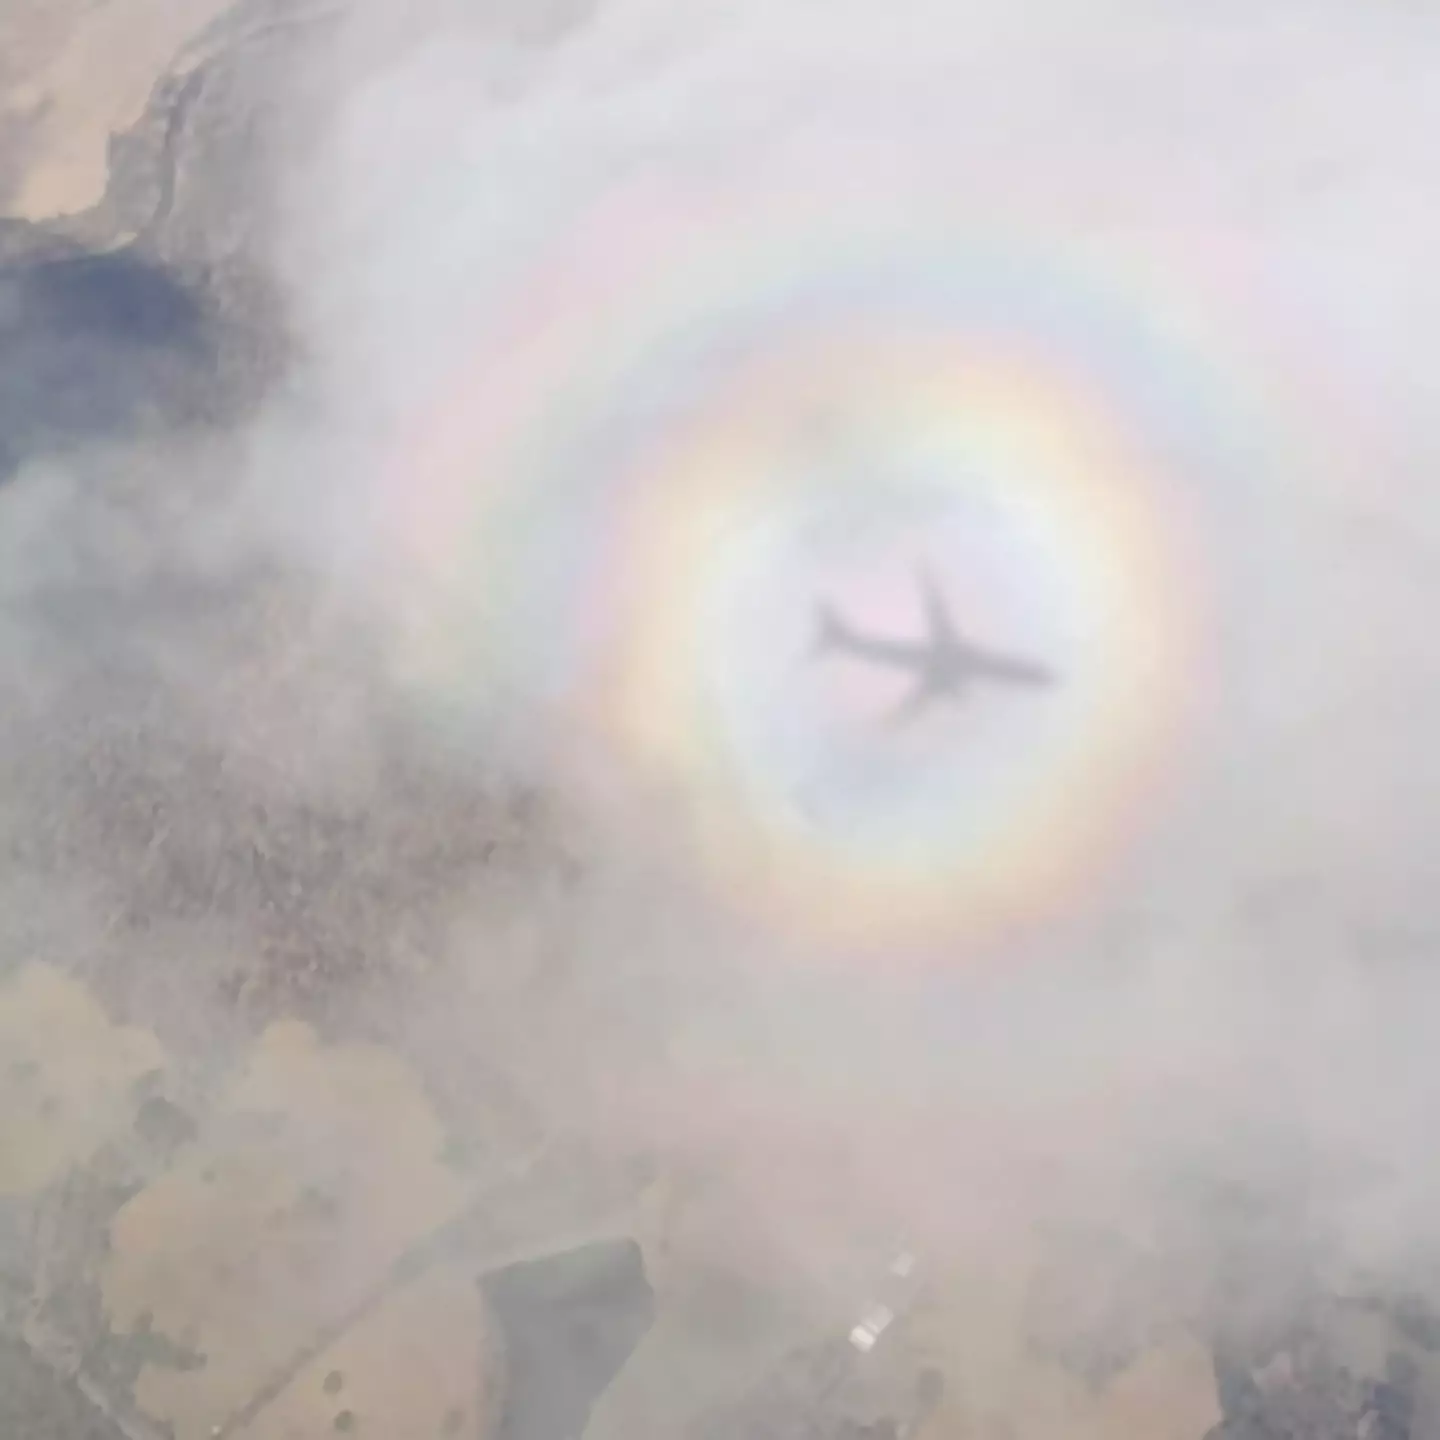 Woman takes ‘crazy’ photo of plane surrounded by rainbow in rare phenomenon known as 'pilot's glory'